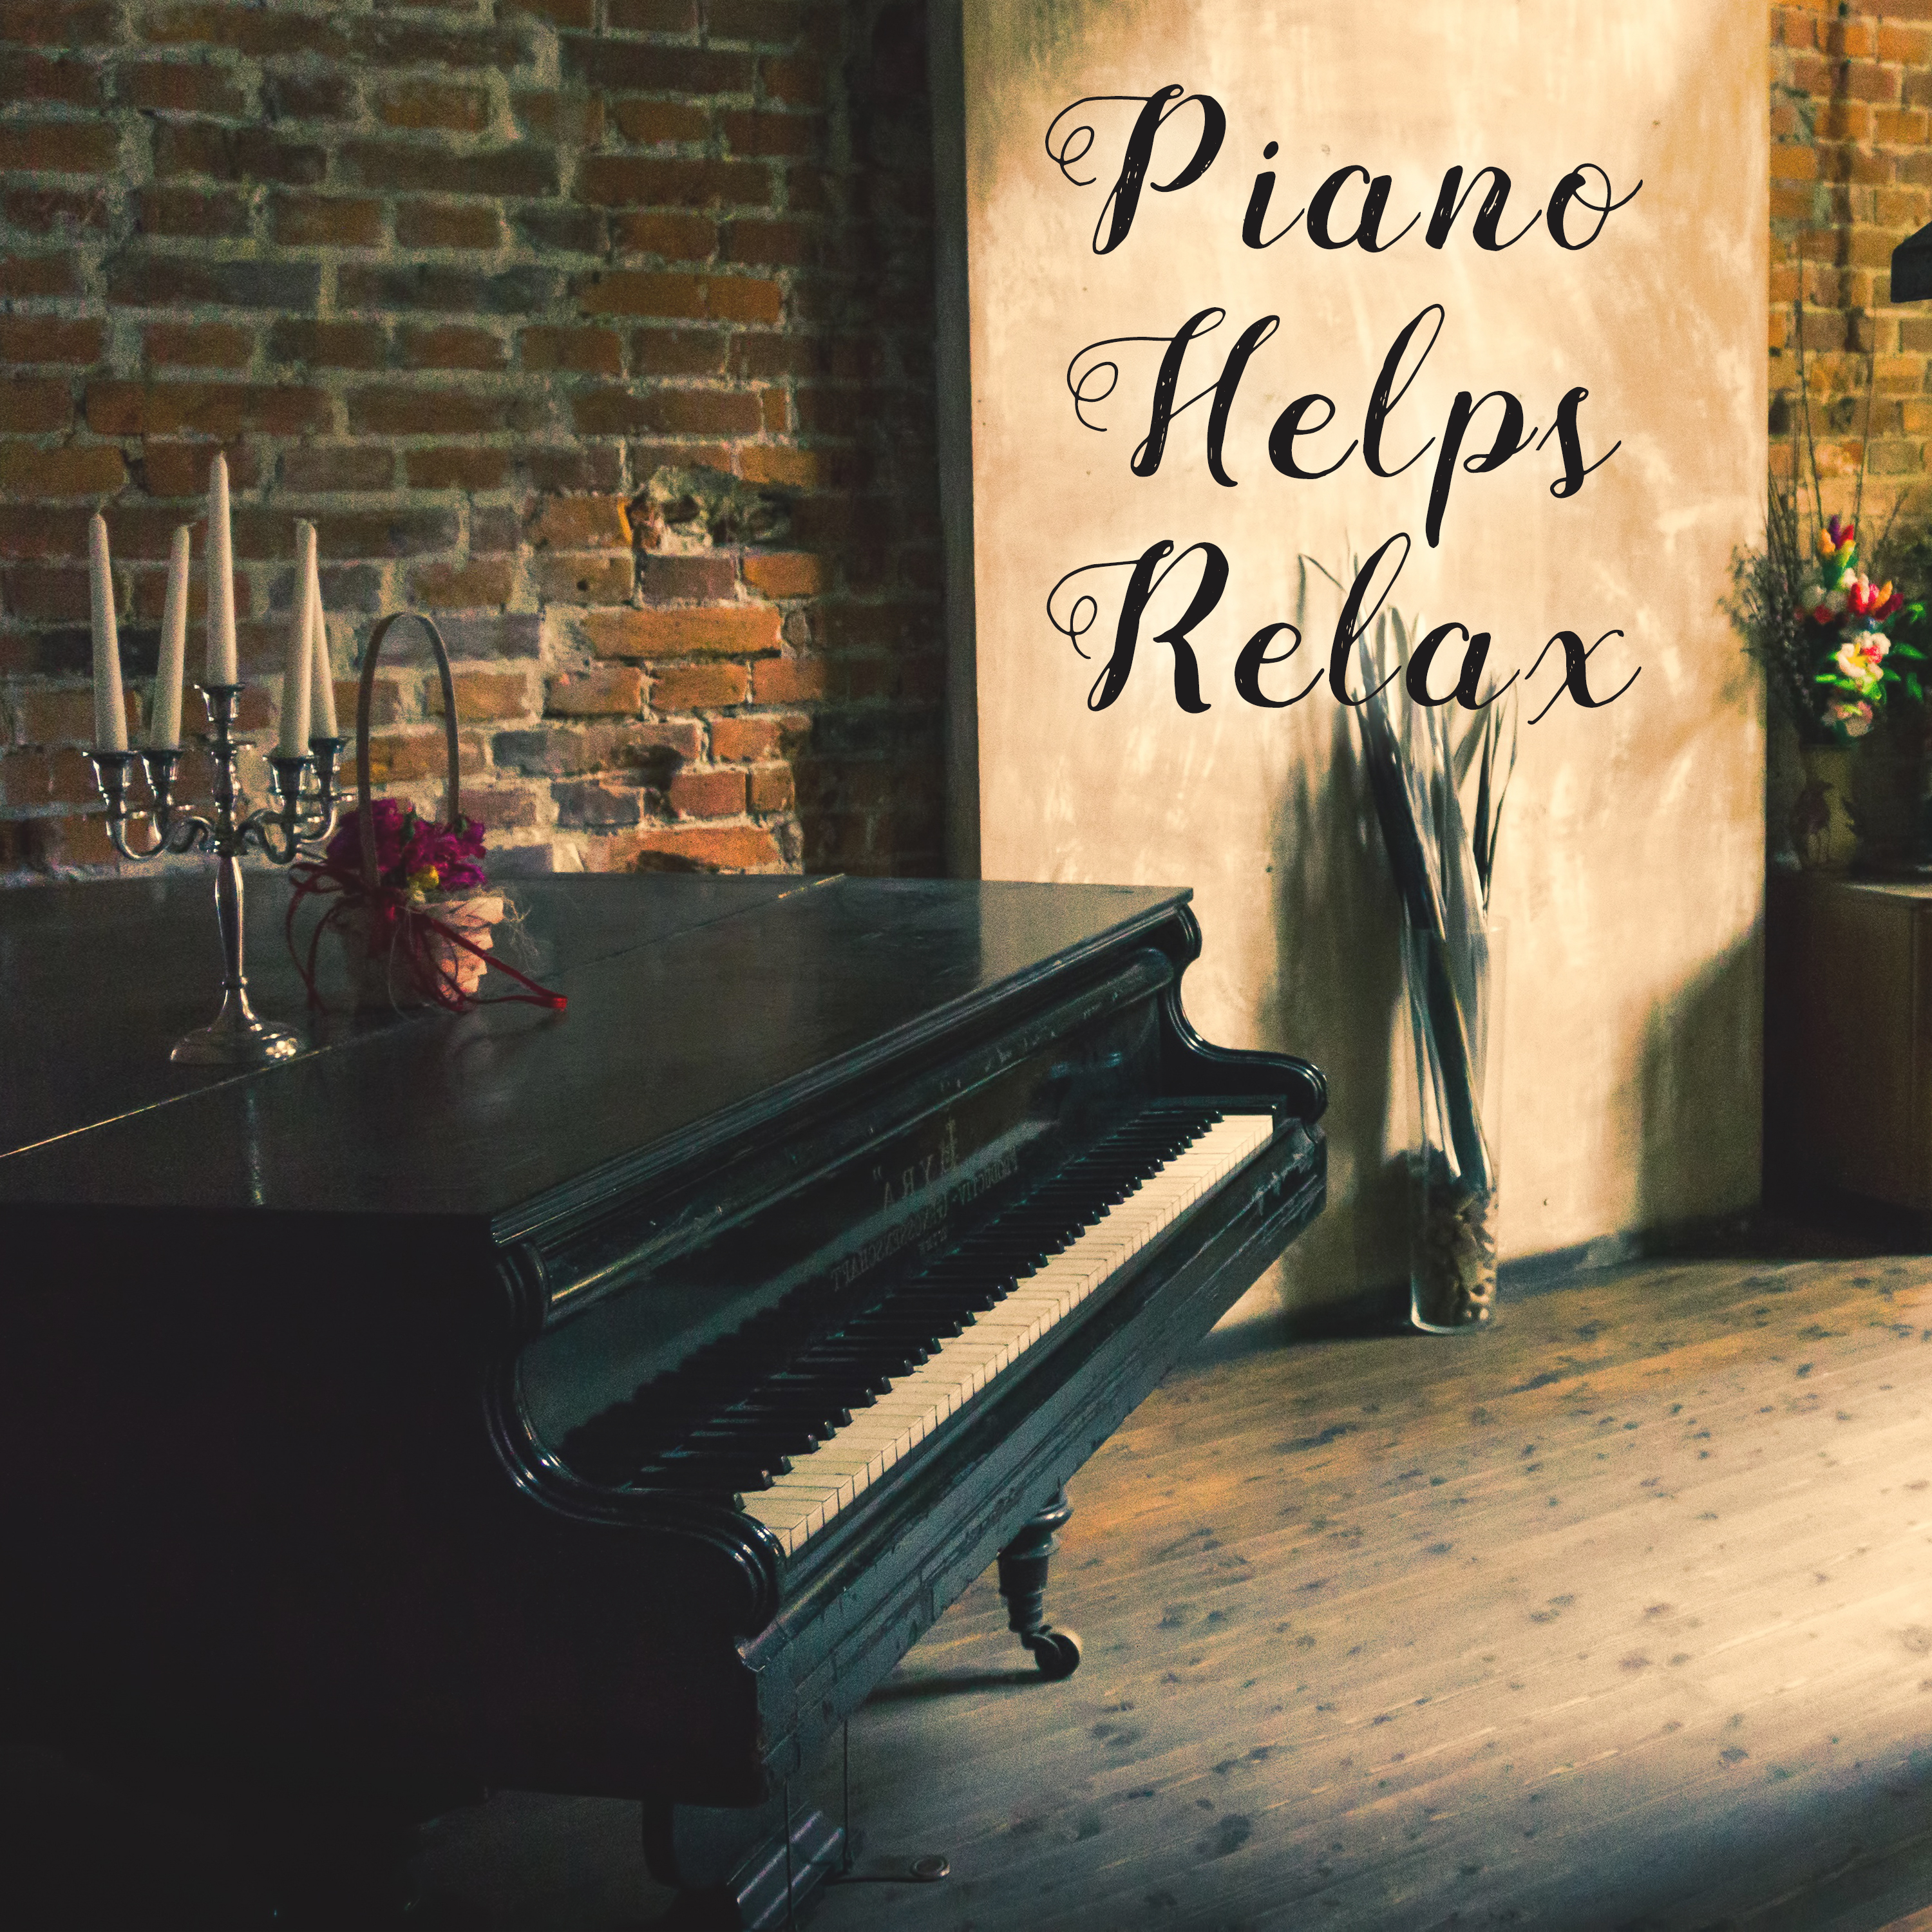 Piano Helps Relax  Anti Stress Jazz, Calm Down, Peaceful Piano Music, Chilled Jazz, Calm Vibes